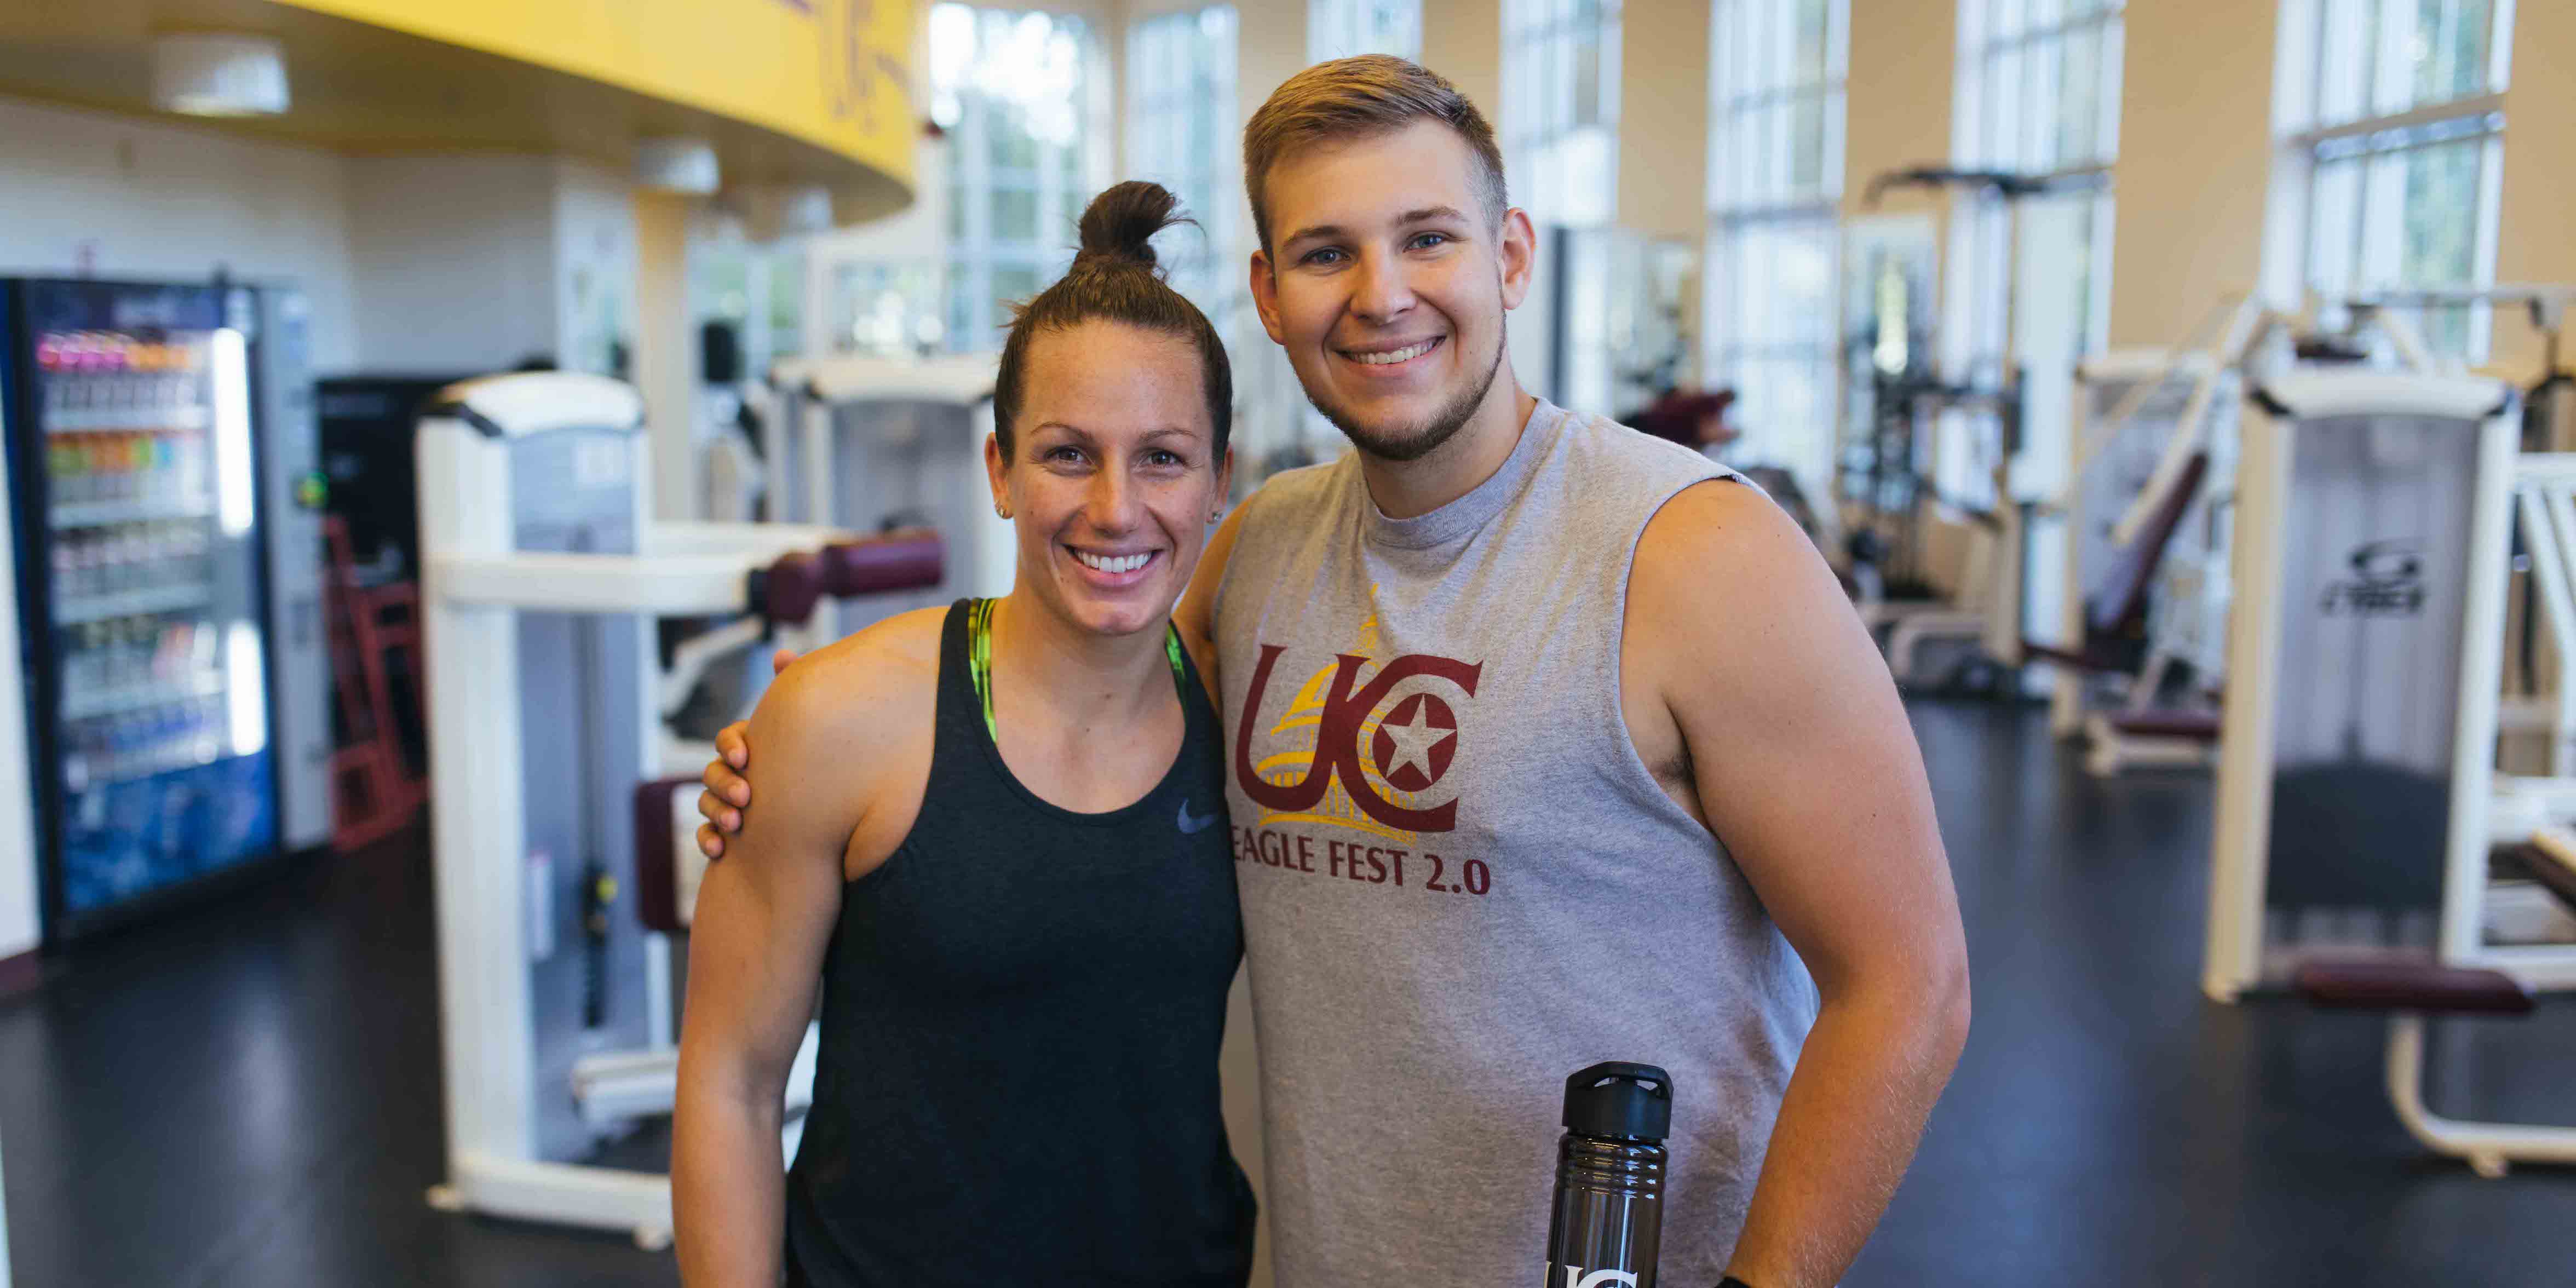 male and female in workout apparel posing in fitness center